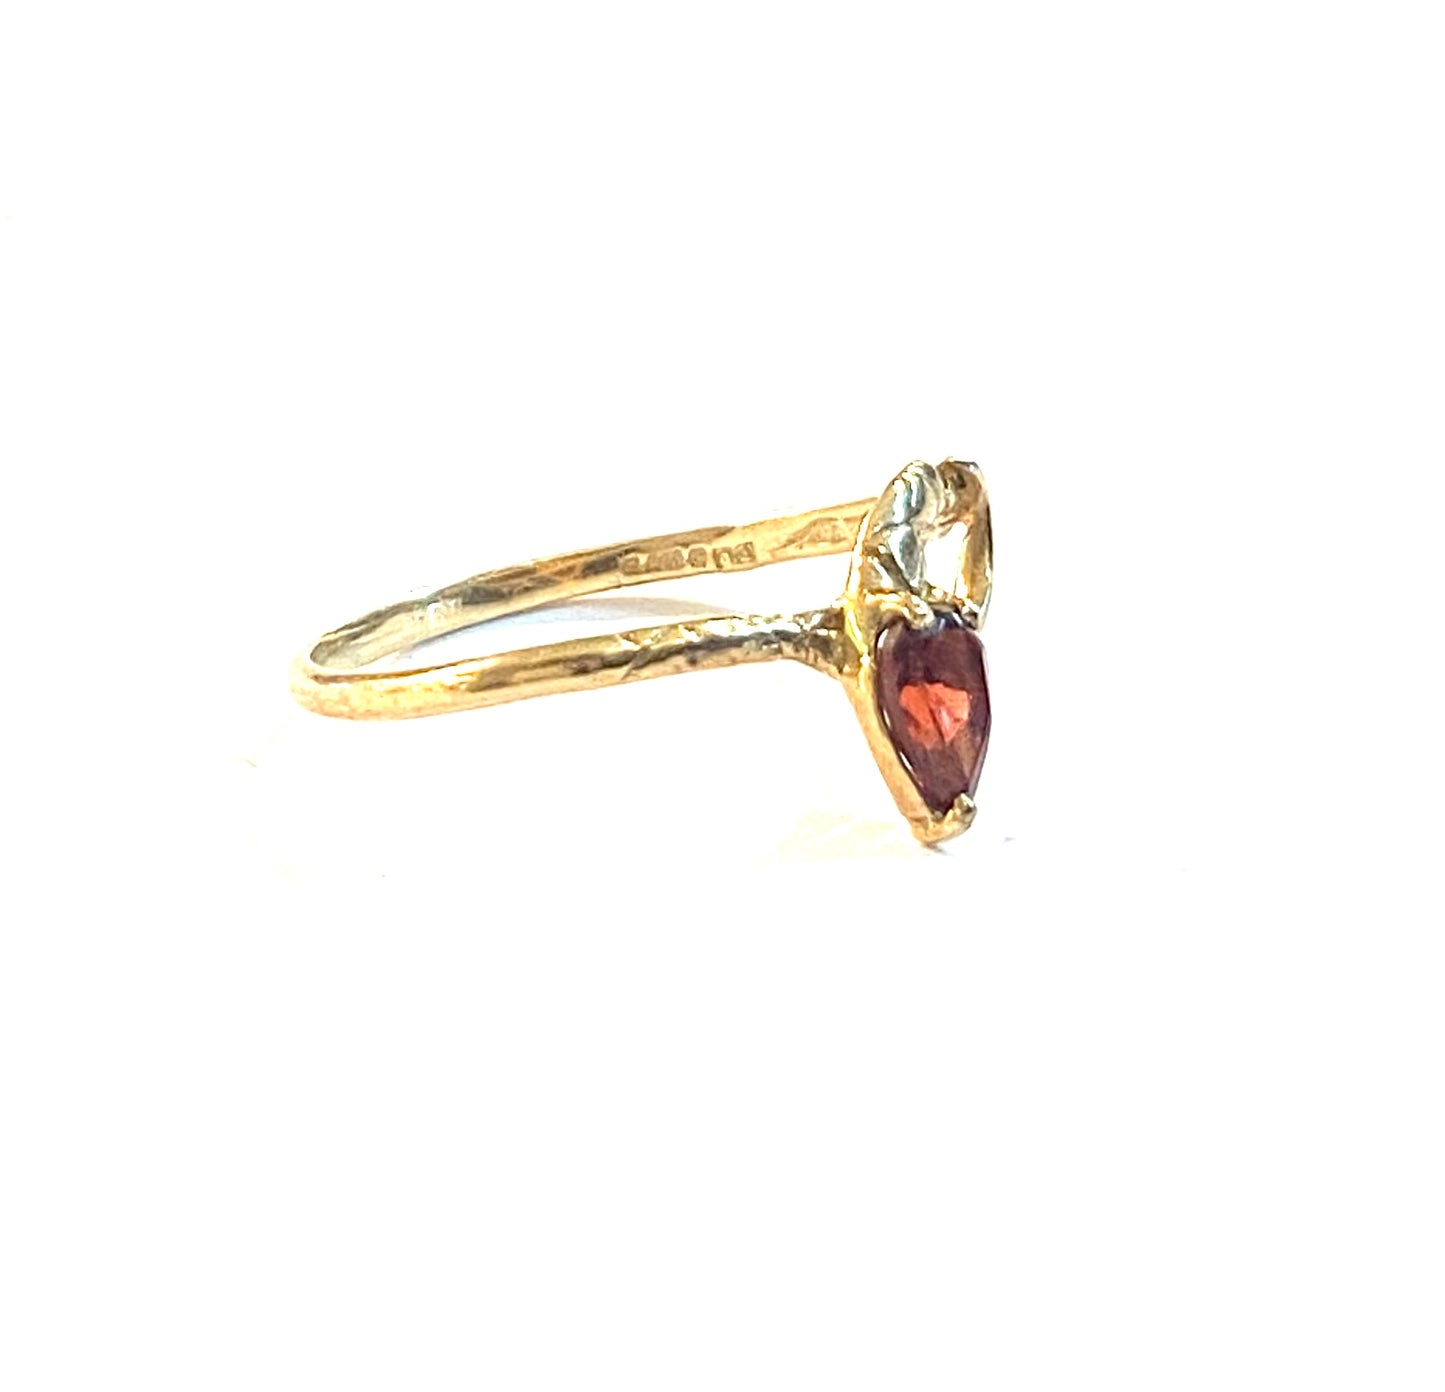 9ct 375 vintage gold snake ring with garnet head ring size O